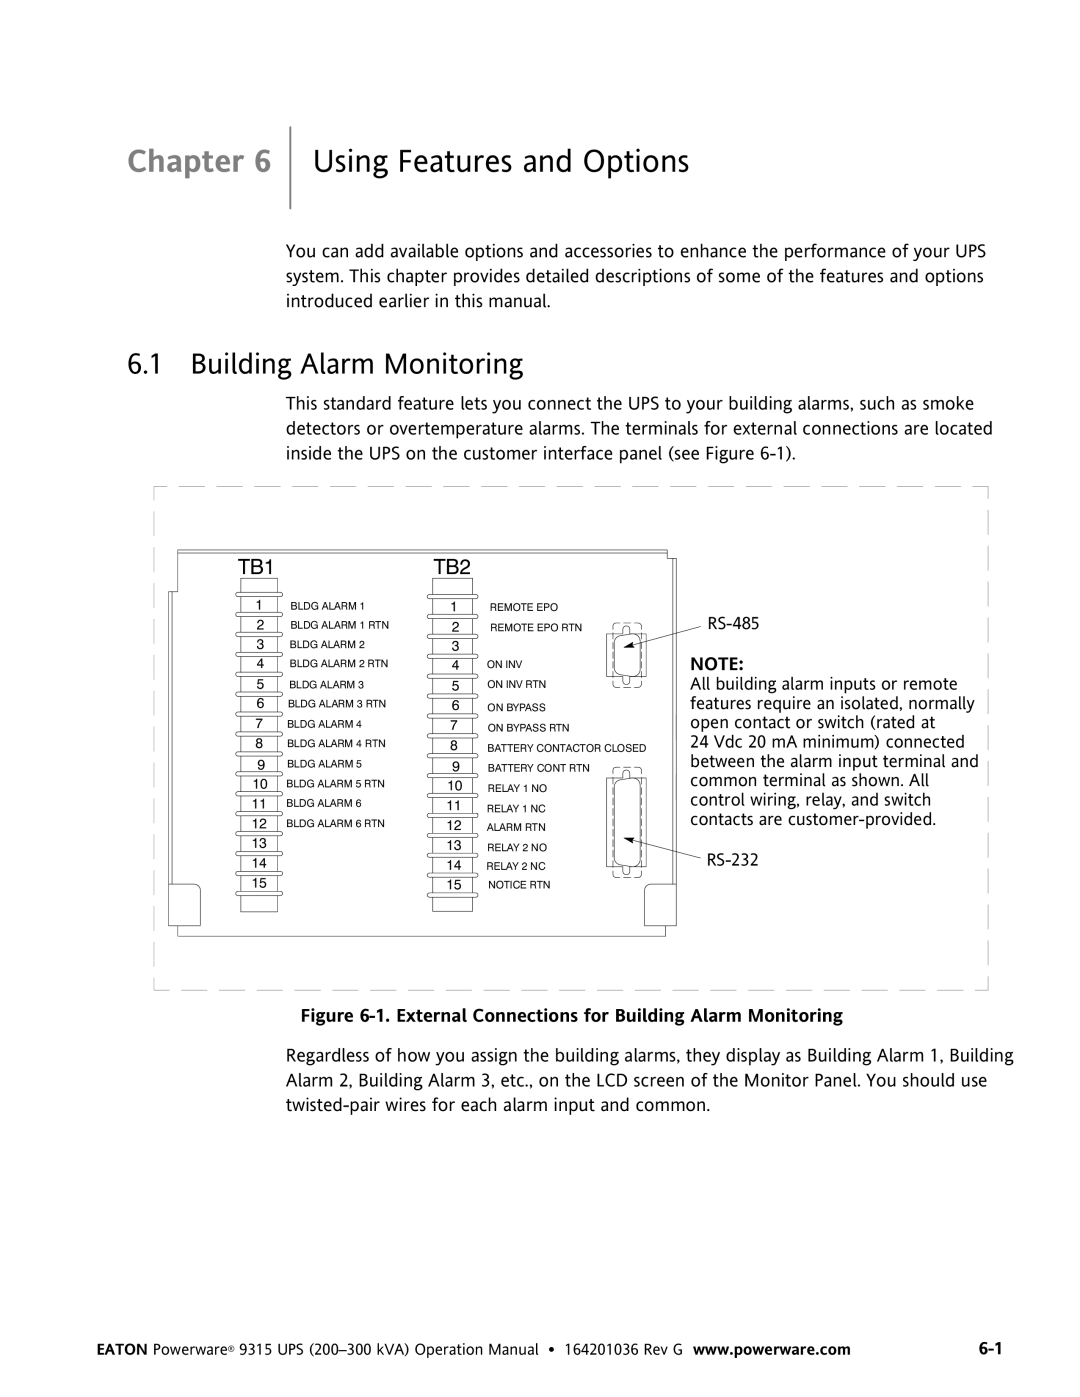 Powerware 9315 UPS operation manual Using Features and Options, Building Alarm Monitoring 